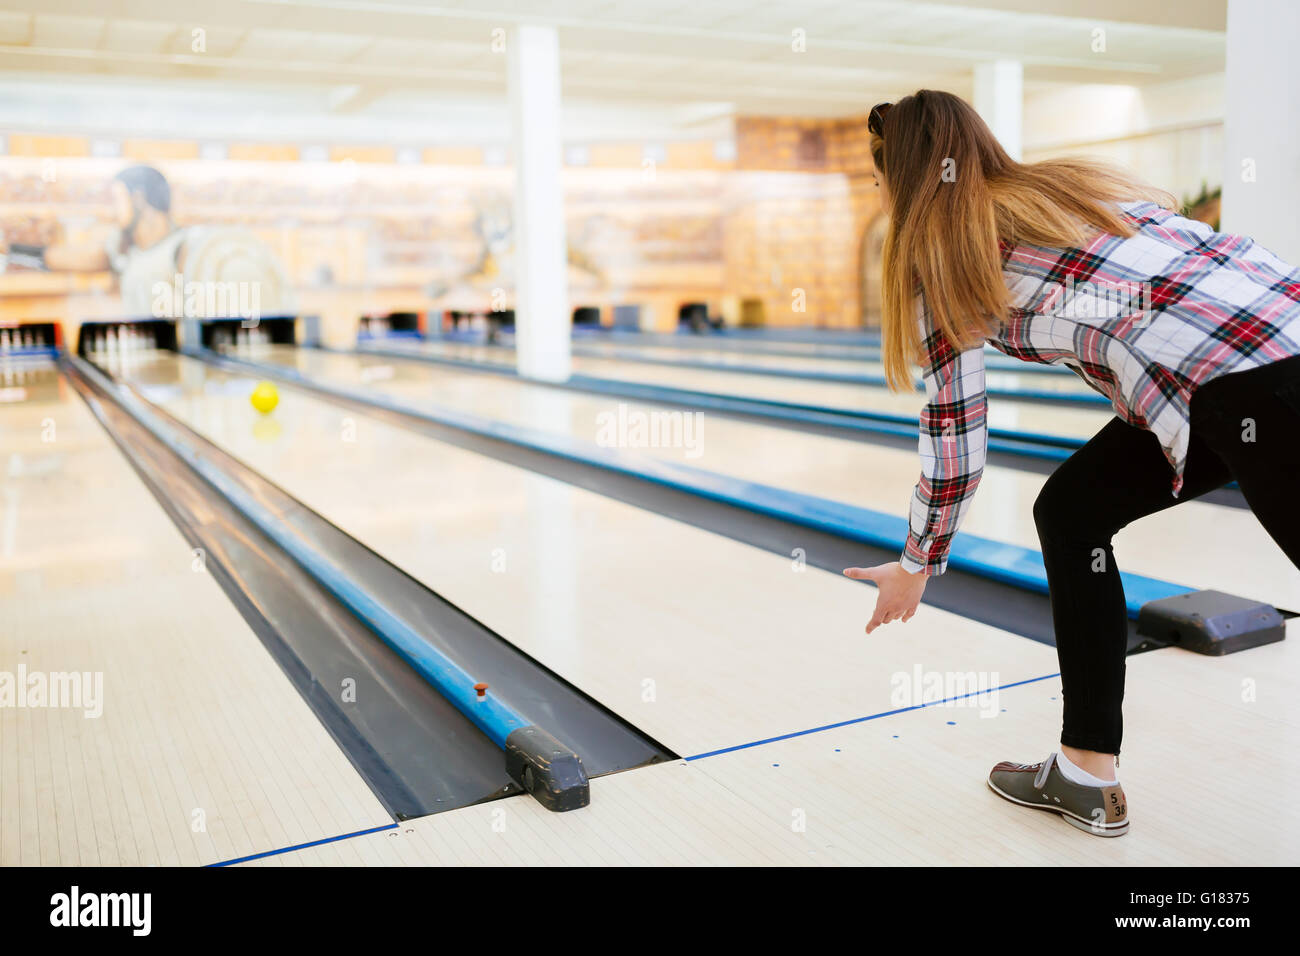 Woman throwing bowling ball in club Stock Photo